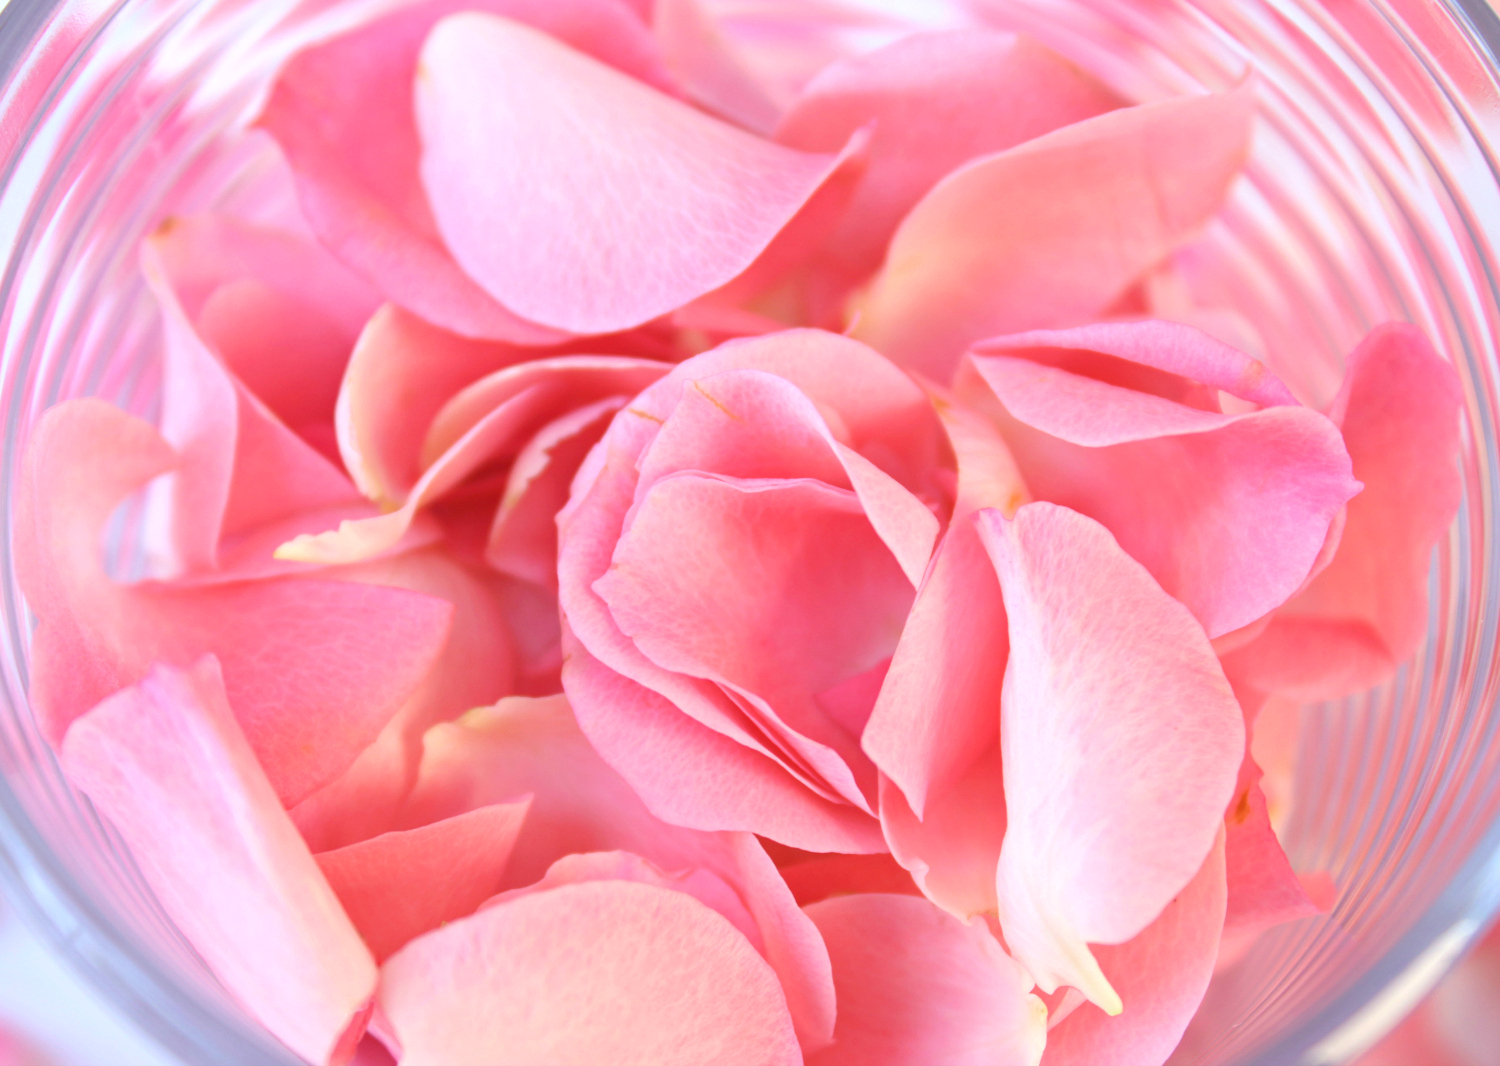 Fresh pink rose petals used in blogger Stephanie Ziajka's rose water recipe on Diary of a Debutante